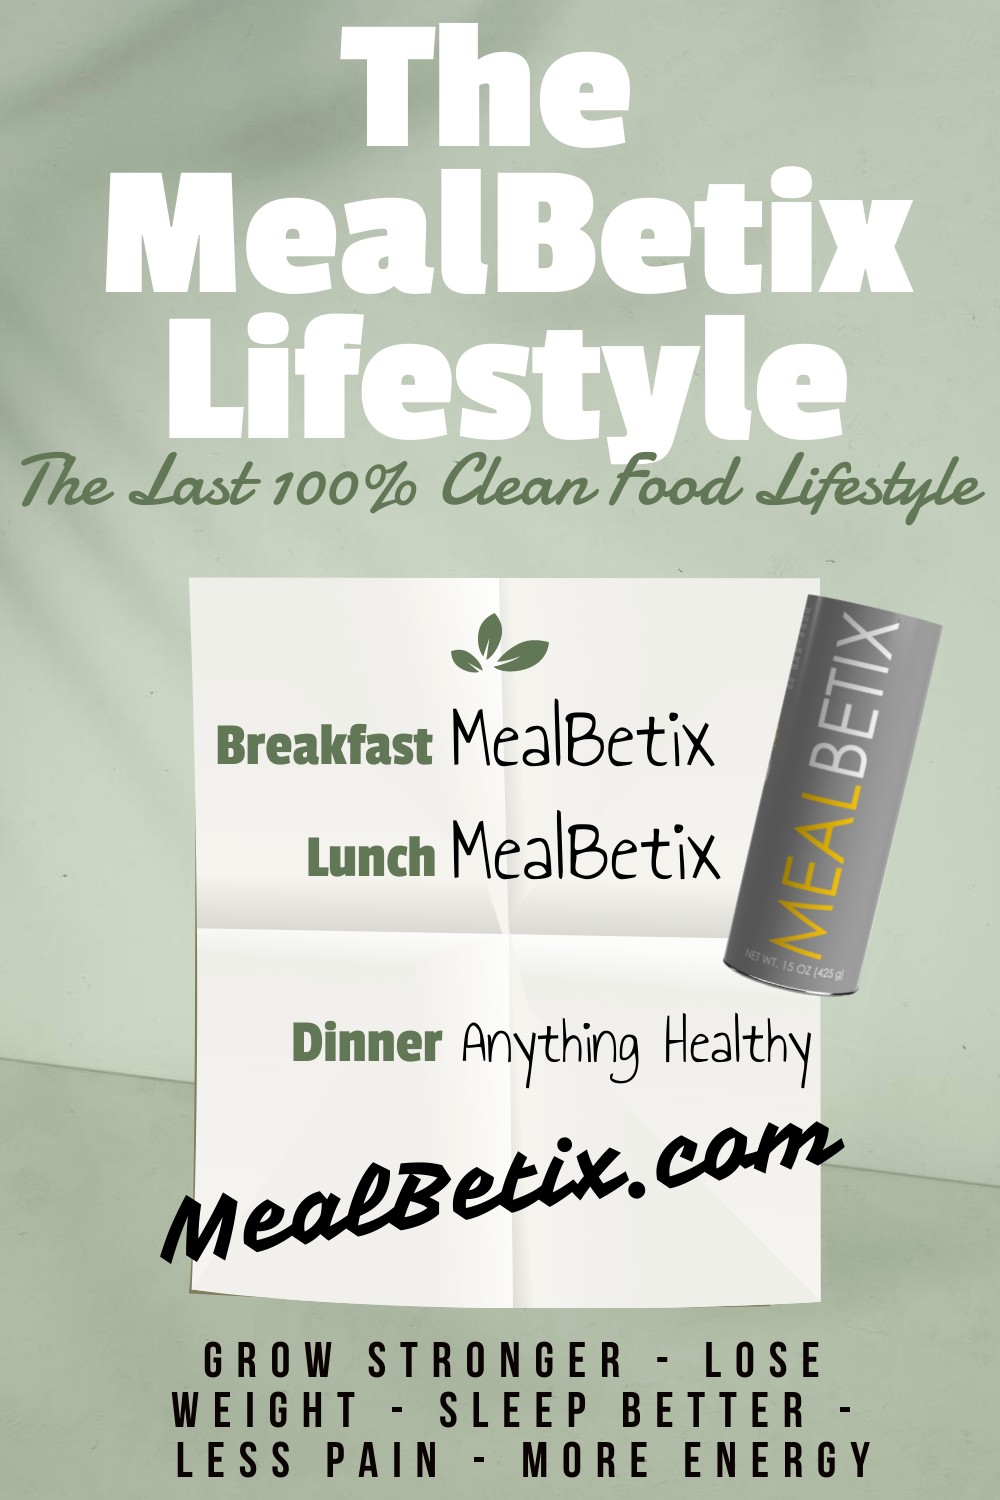 JOIN THE MEALBETIX LIFESTYLE